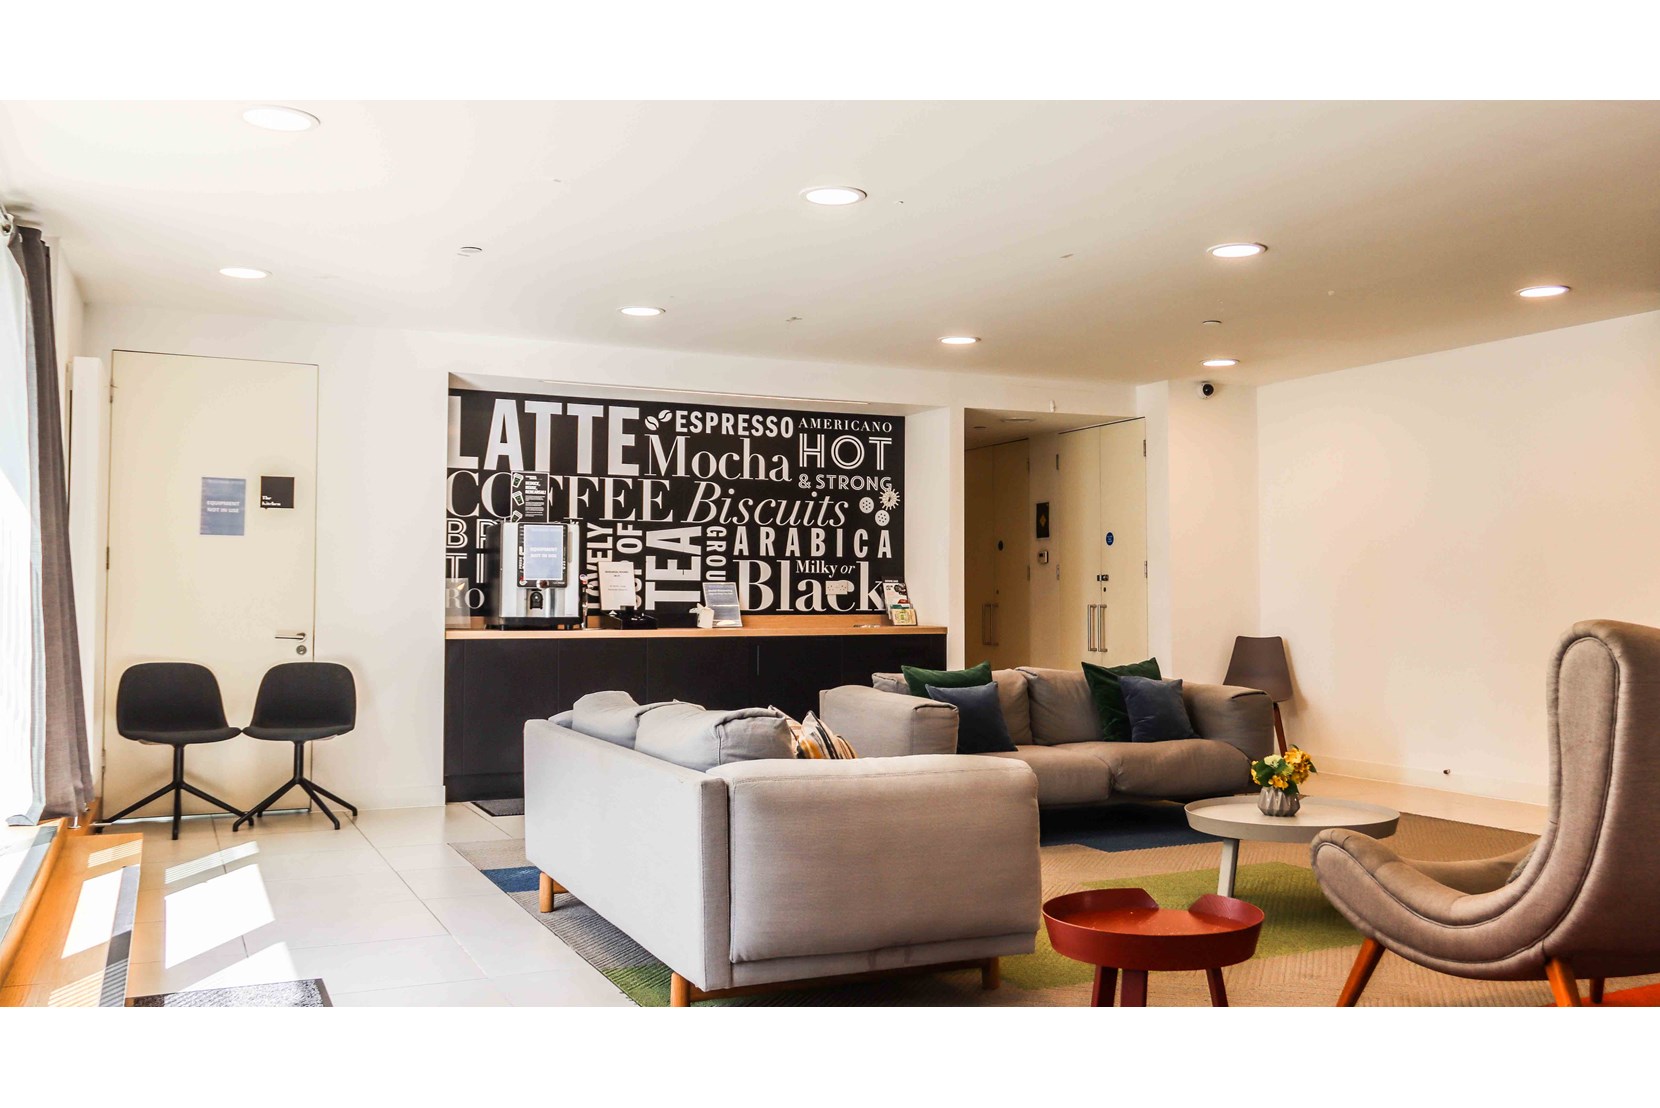 Apartments to Rent by Savills at Rehearsal Rooms, Ealing, W3, communal lounge area